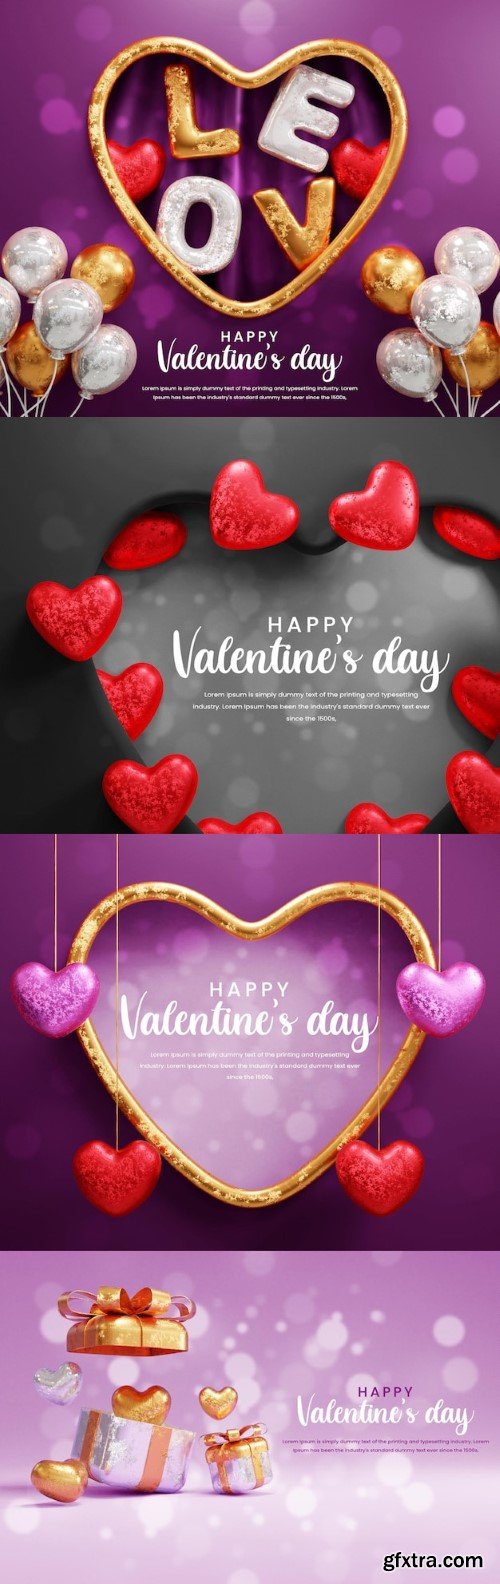 Valentines day celebration banners